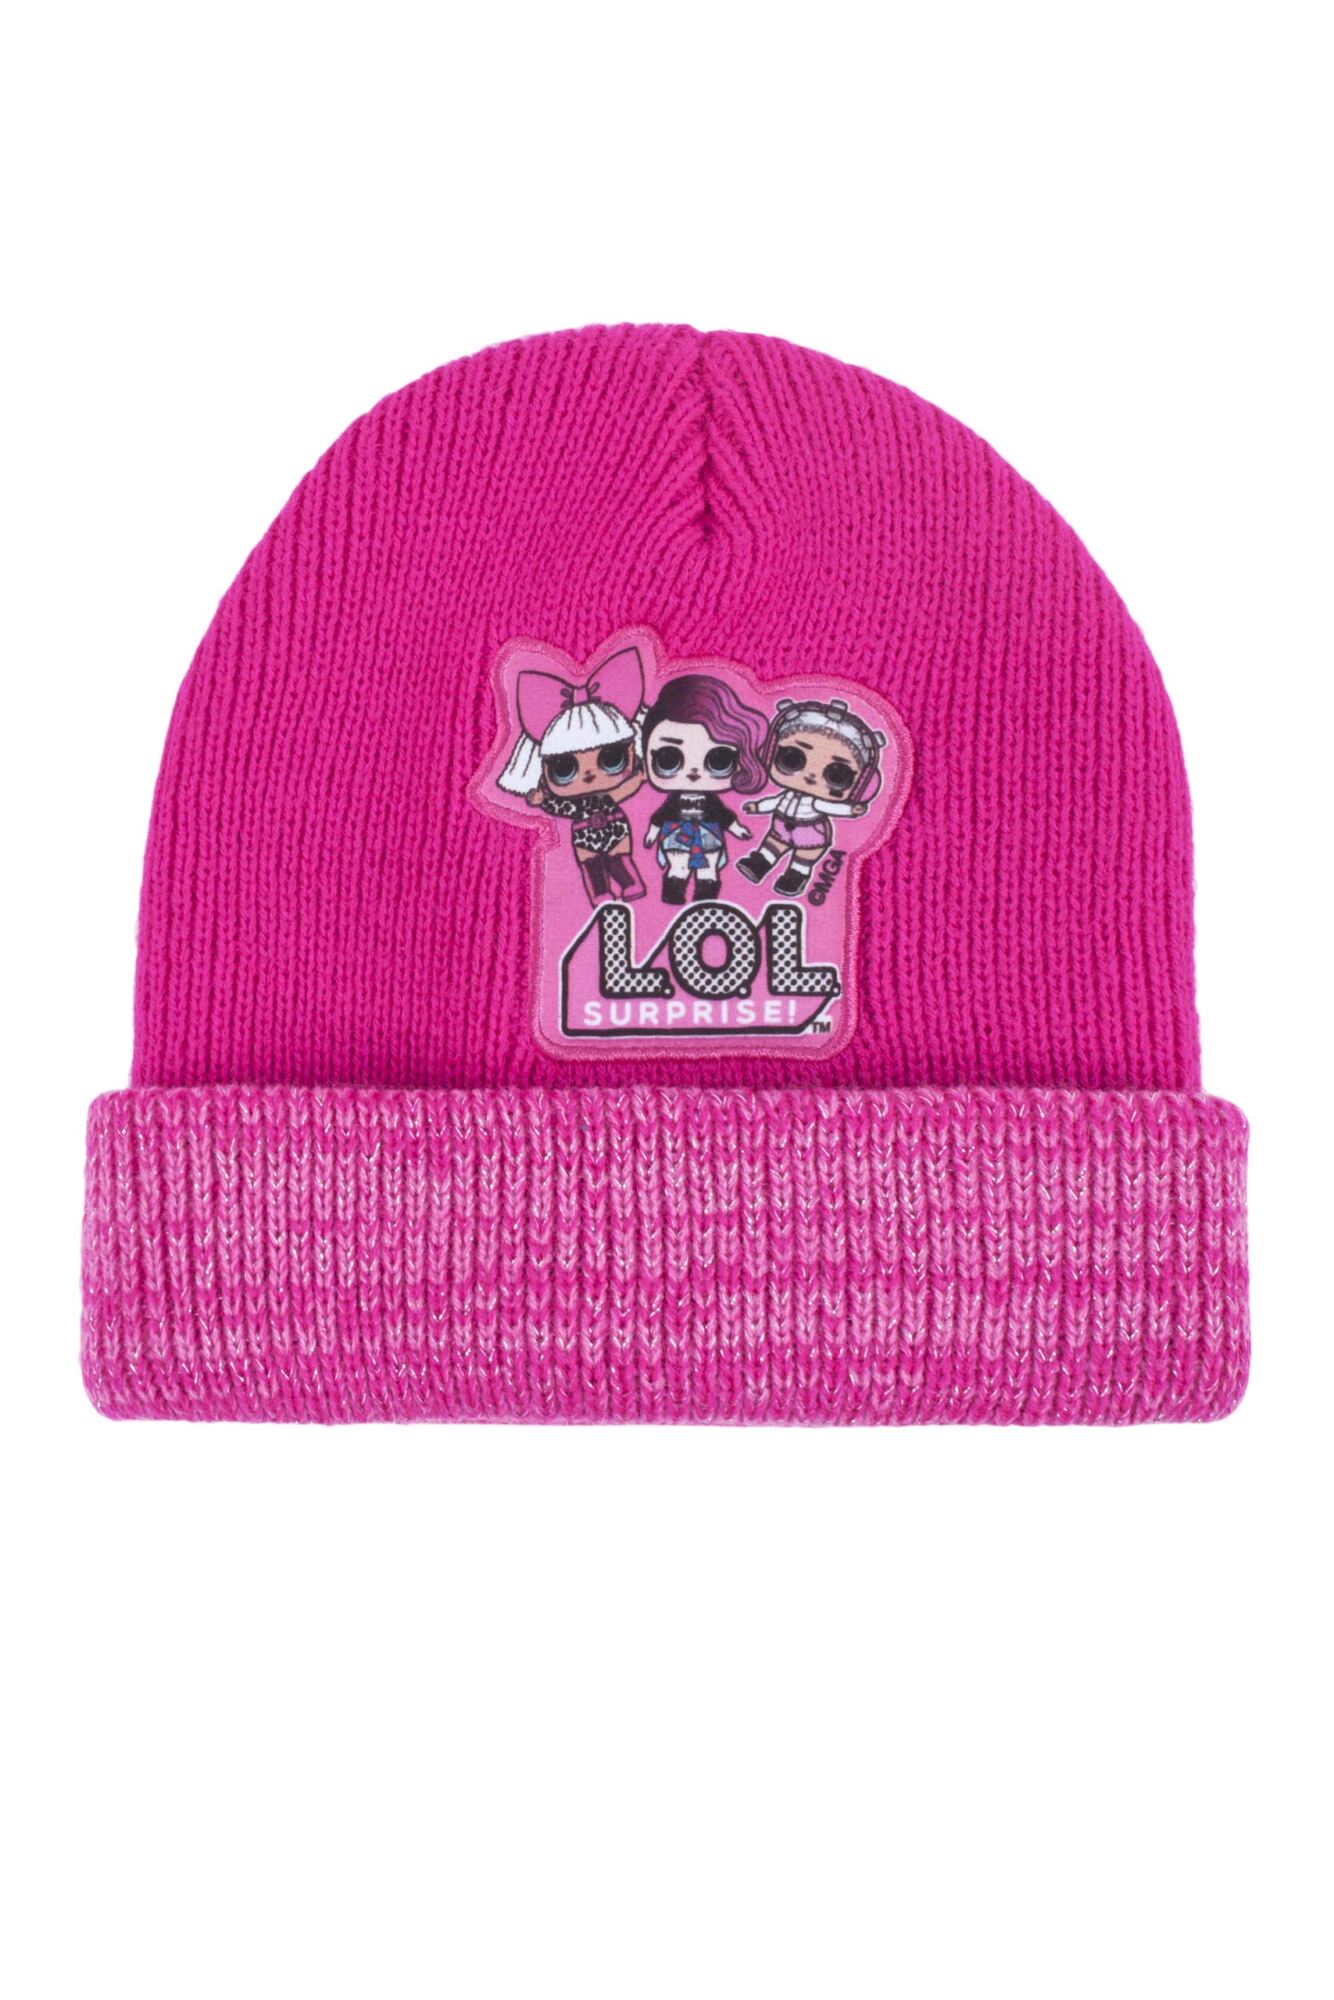 1 Pack L.O.L. Surprise! Knitted Double Layered Hat Girls - Film & TV Characters